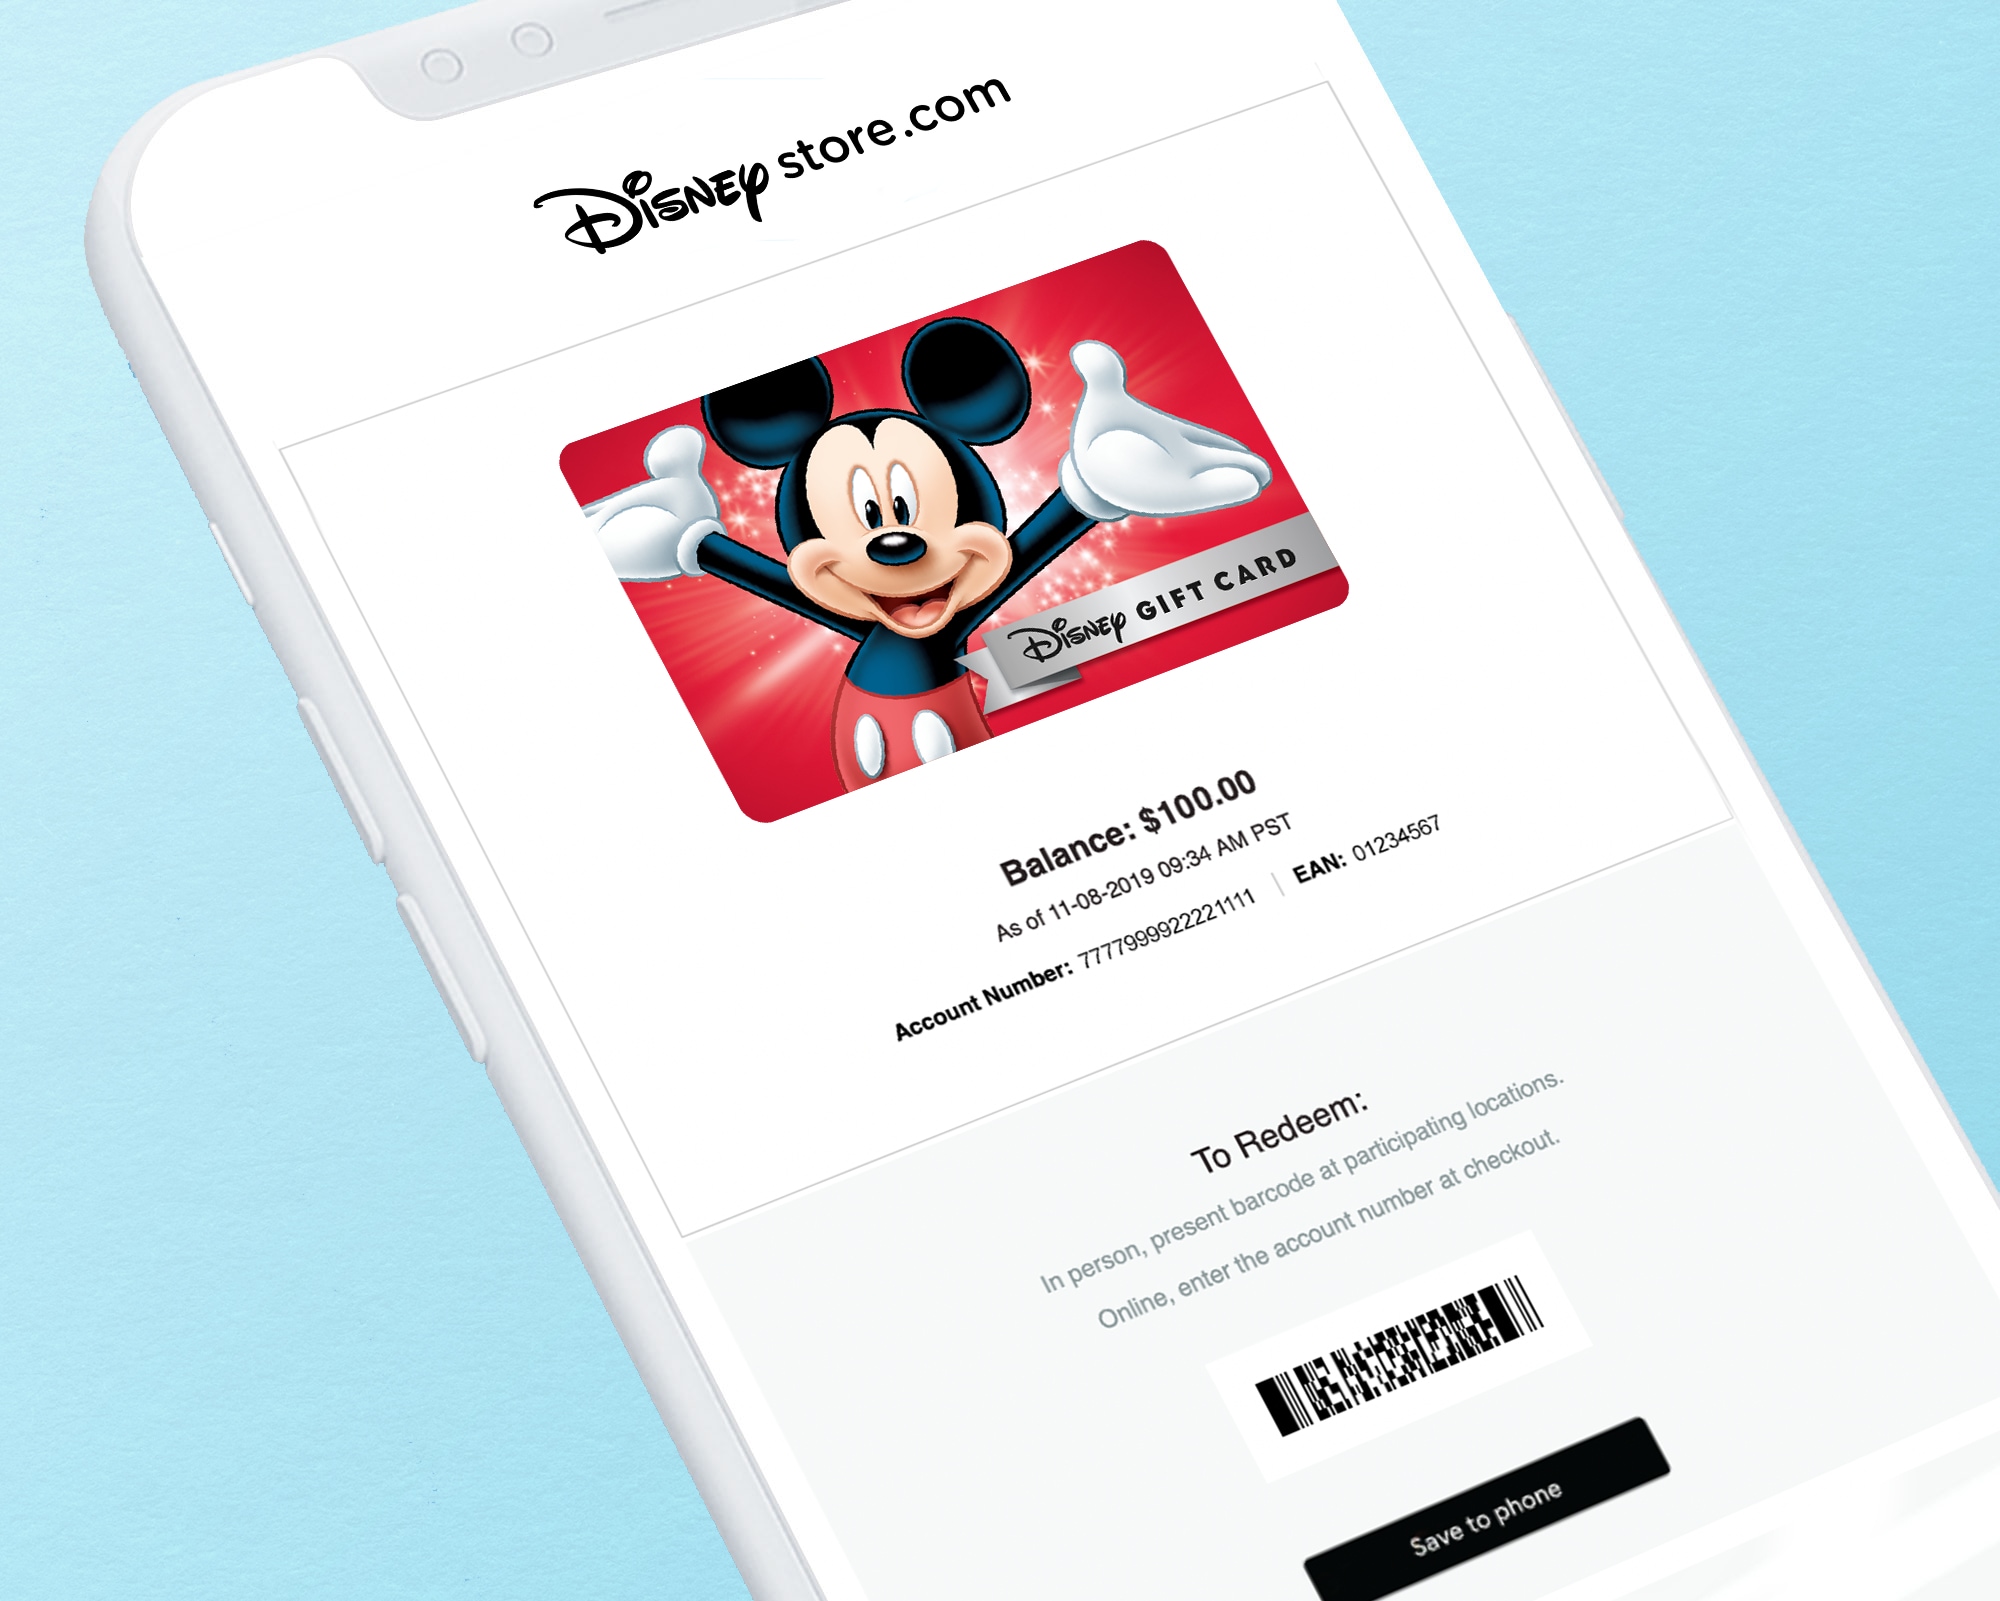 Disney Gift Card  One Card. A World of Possibilities!